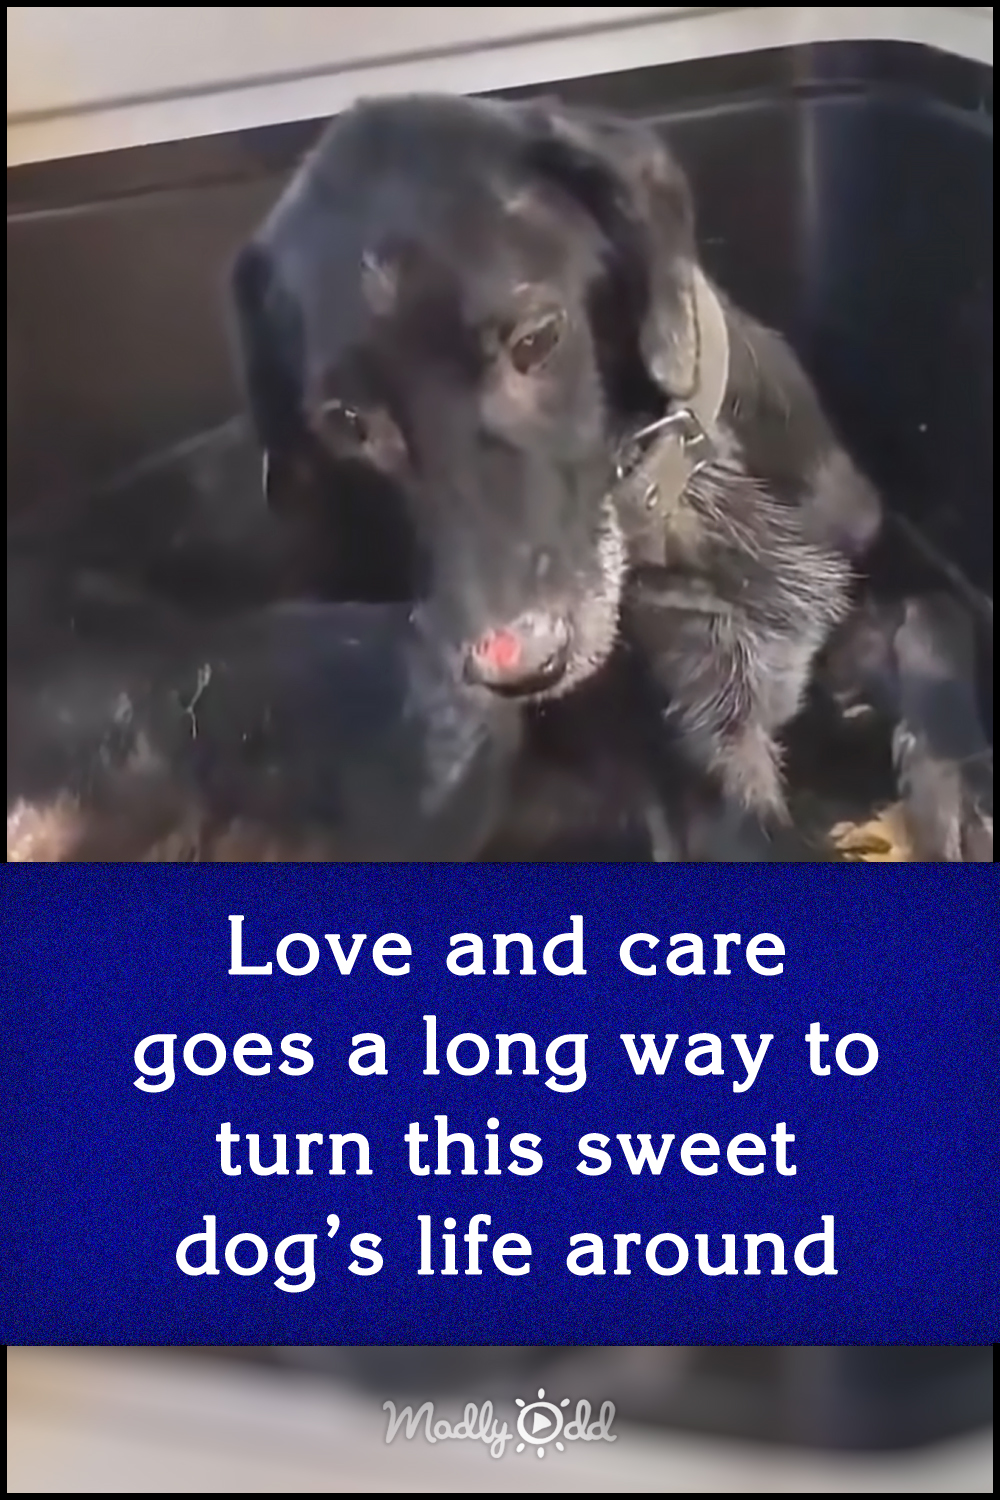 Love and care goes a long way to turn this sweet dog’s life around